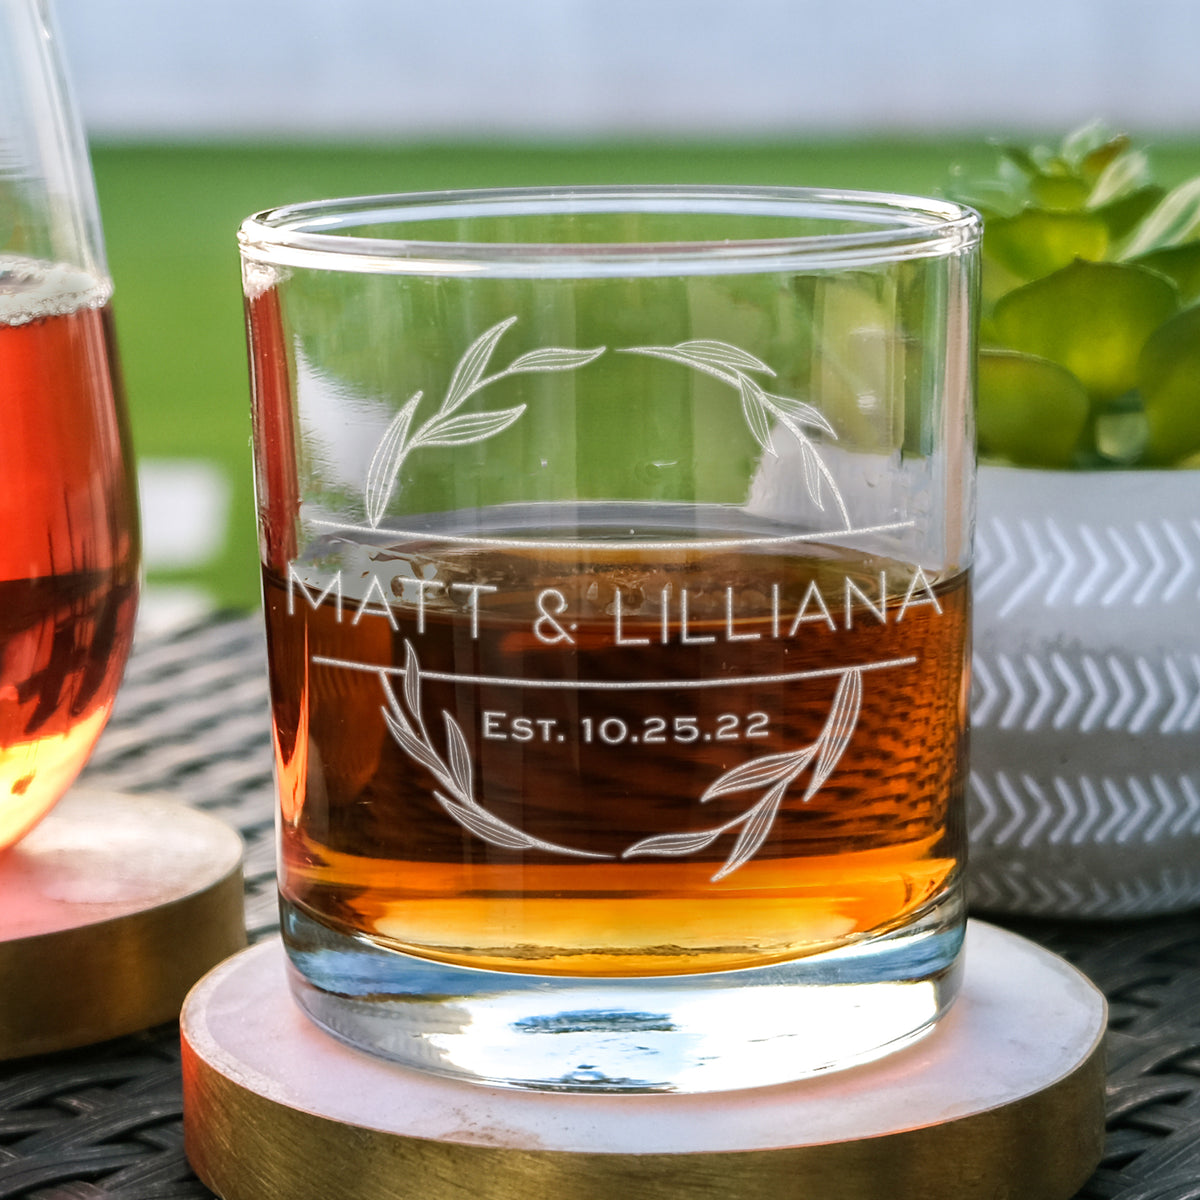 Monogrammed Etched Glasses With Last Name and Established Date